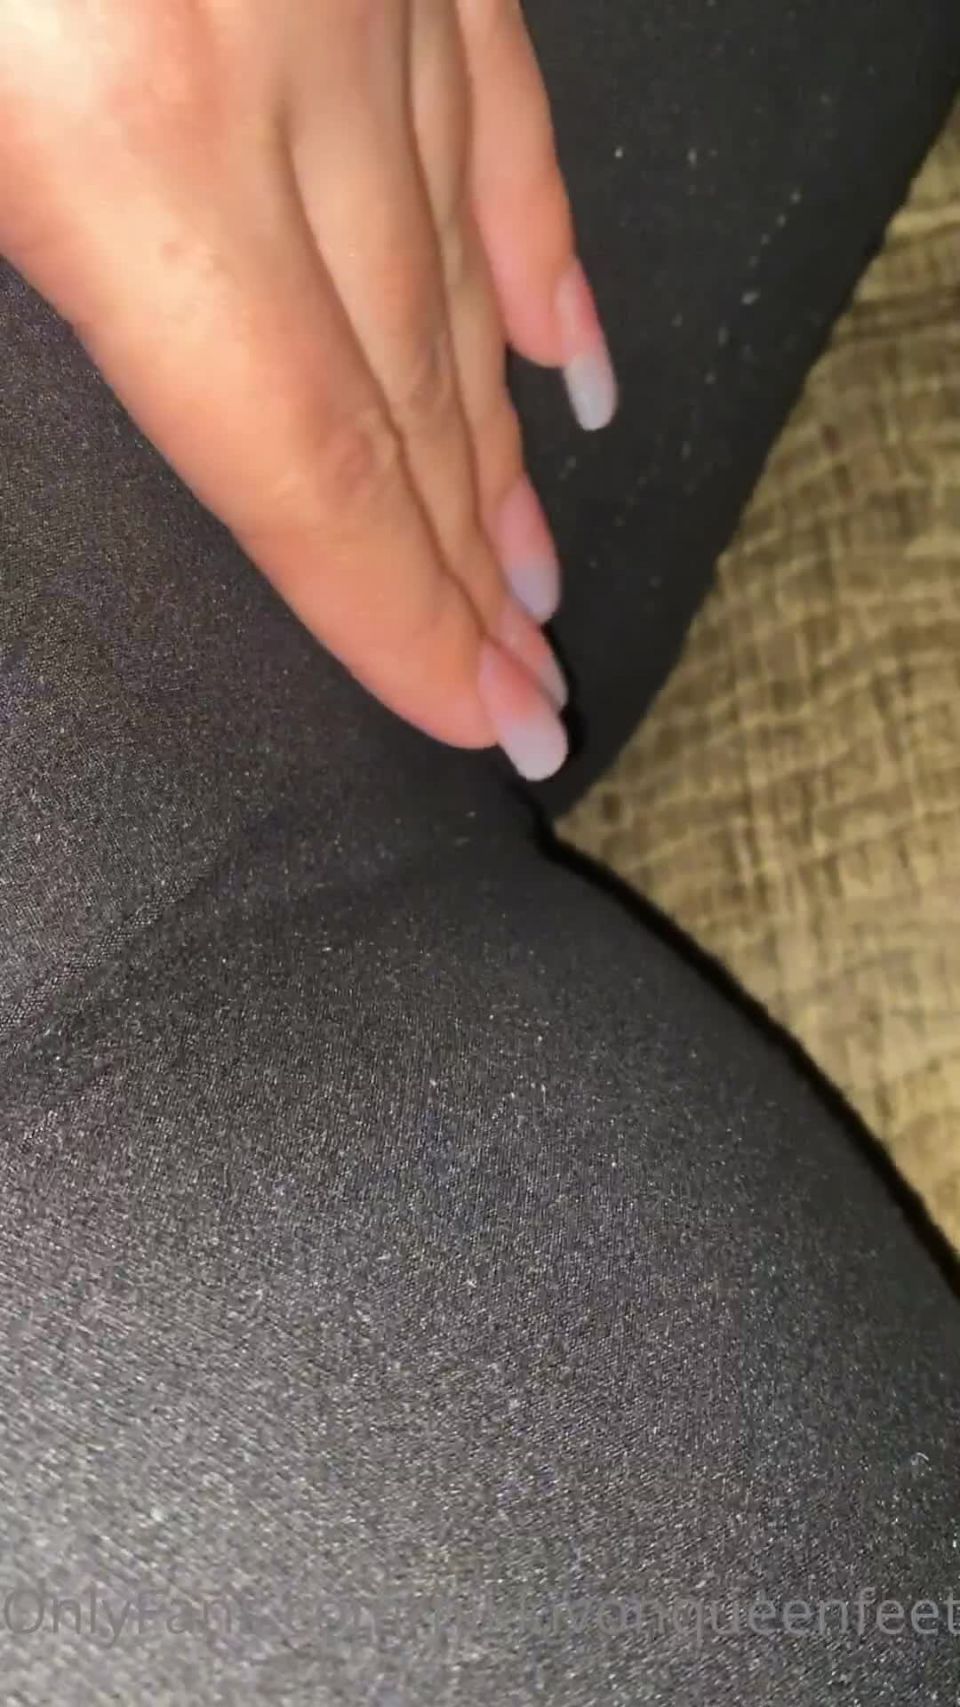 Nikkivonnails - these toes got me so horny waiting for my husband to get home 27-10-2021